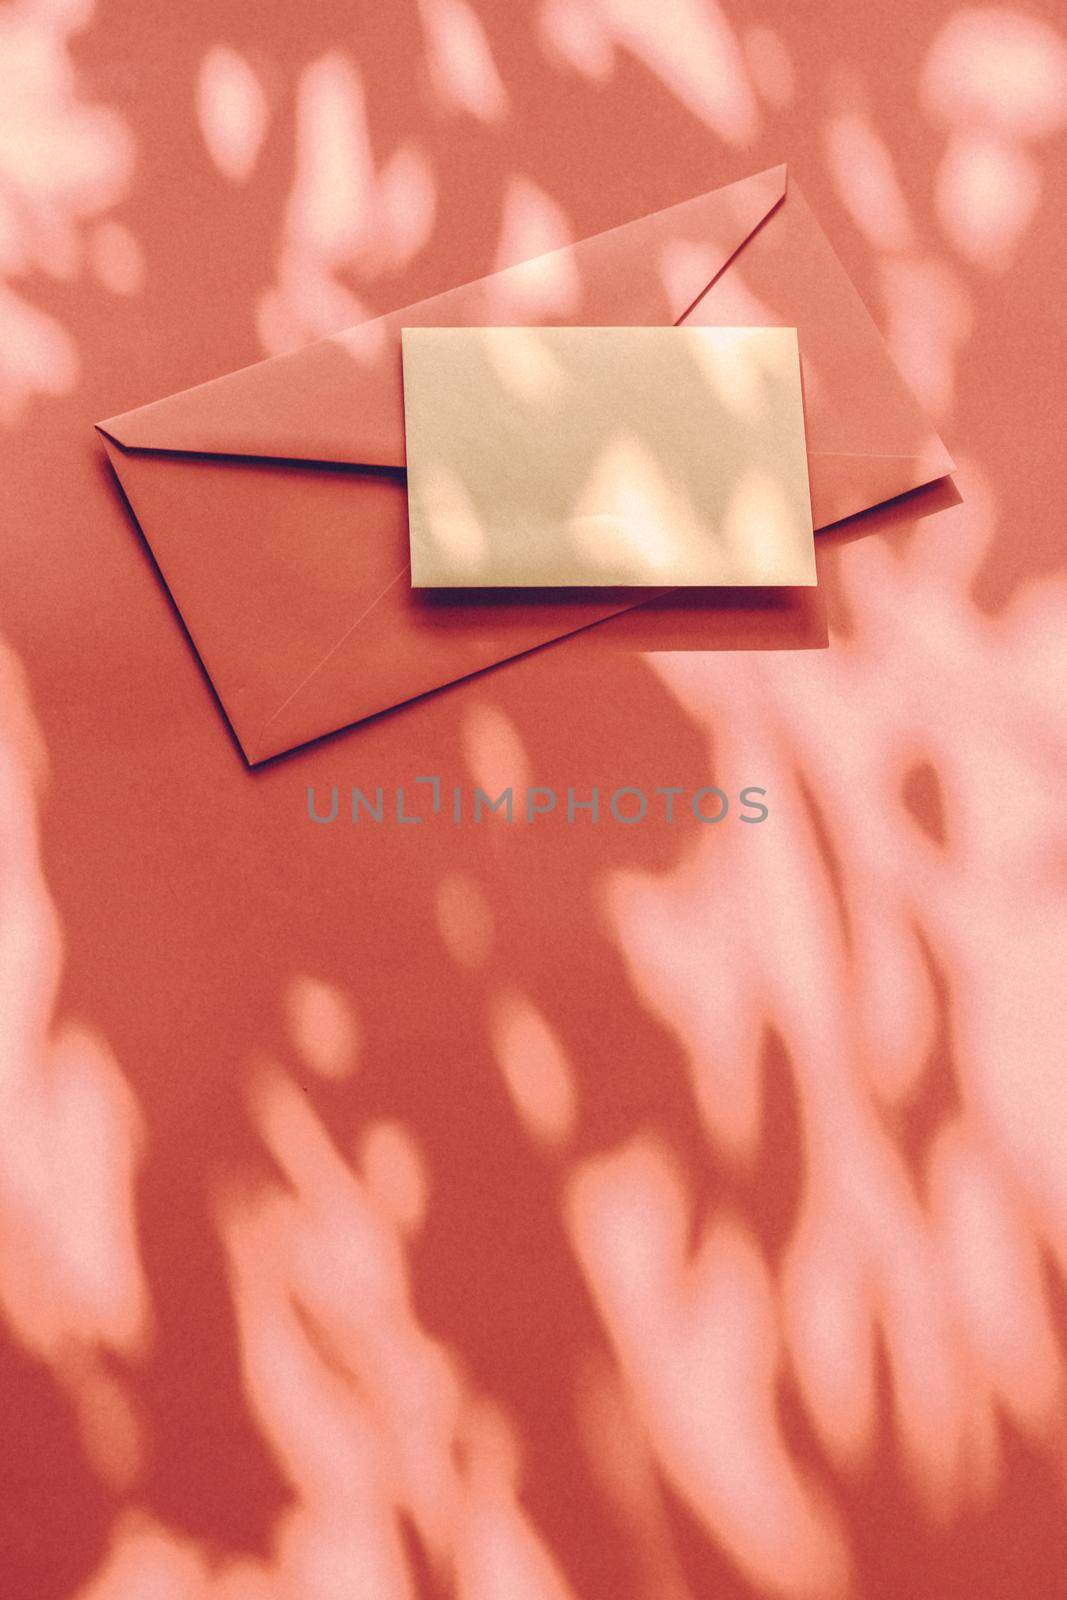 Beauty brand identity as flatlay mockup design, business card and letter for online luxury branding on orange shadow background by Anneleven